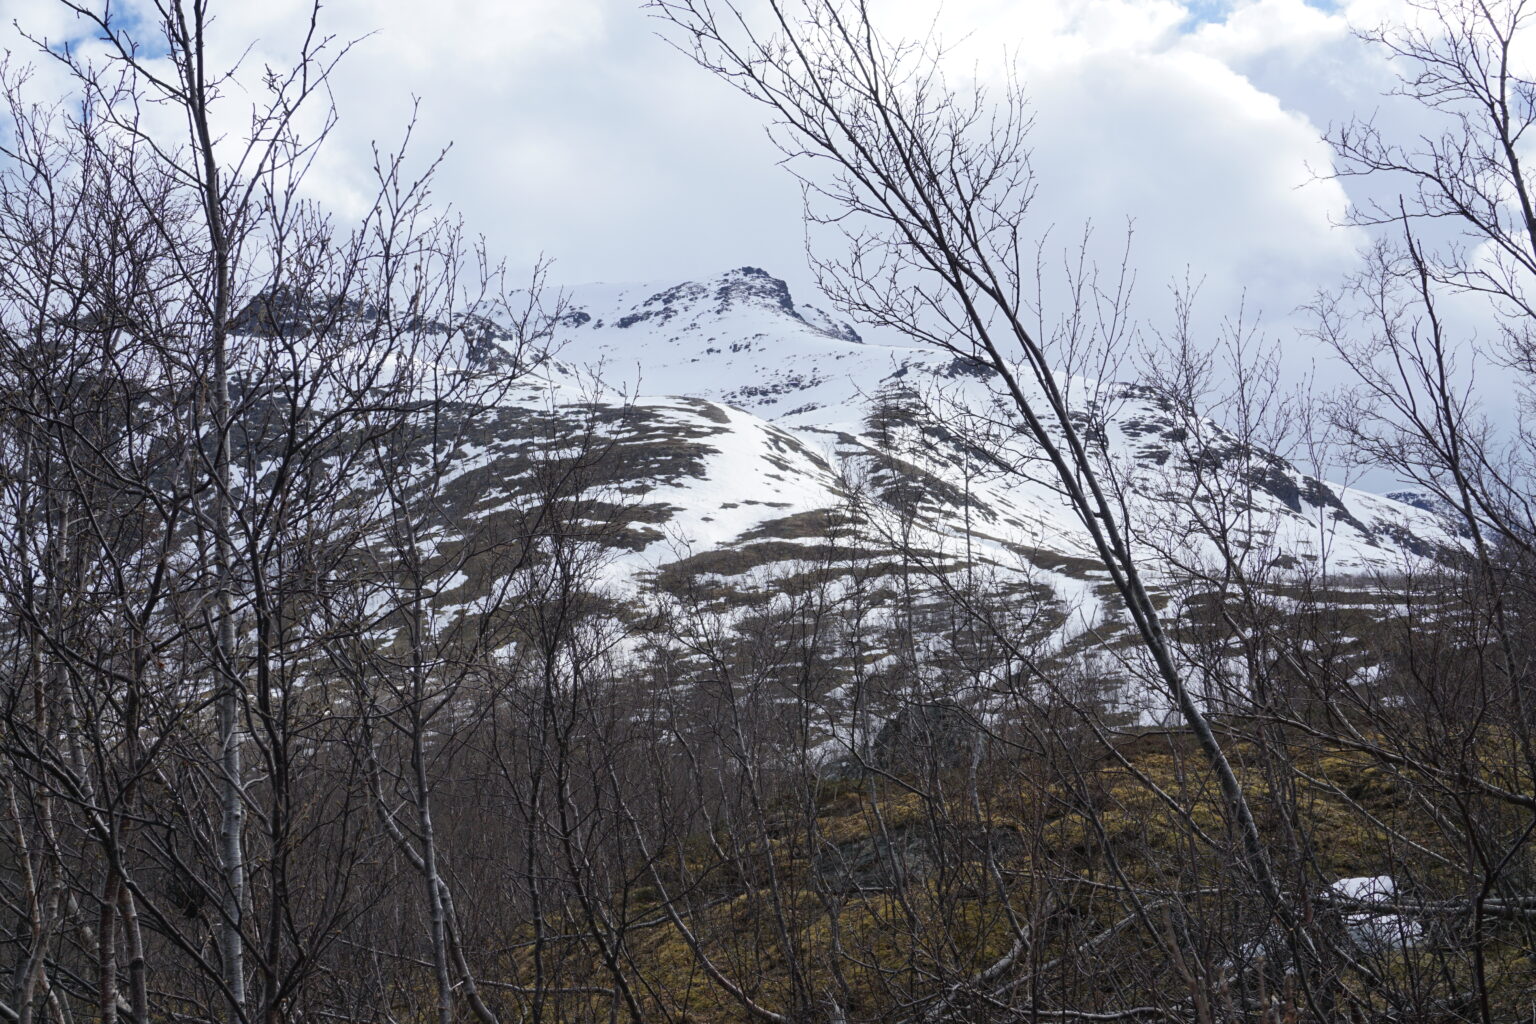 A closer look at Sommarfjellet